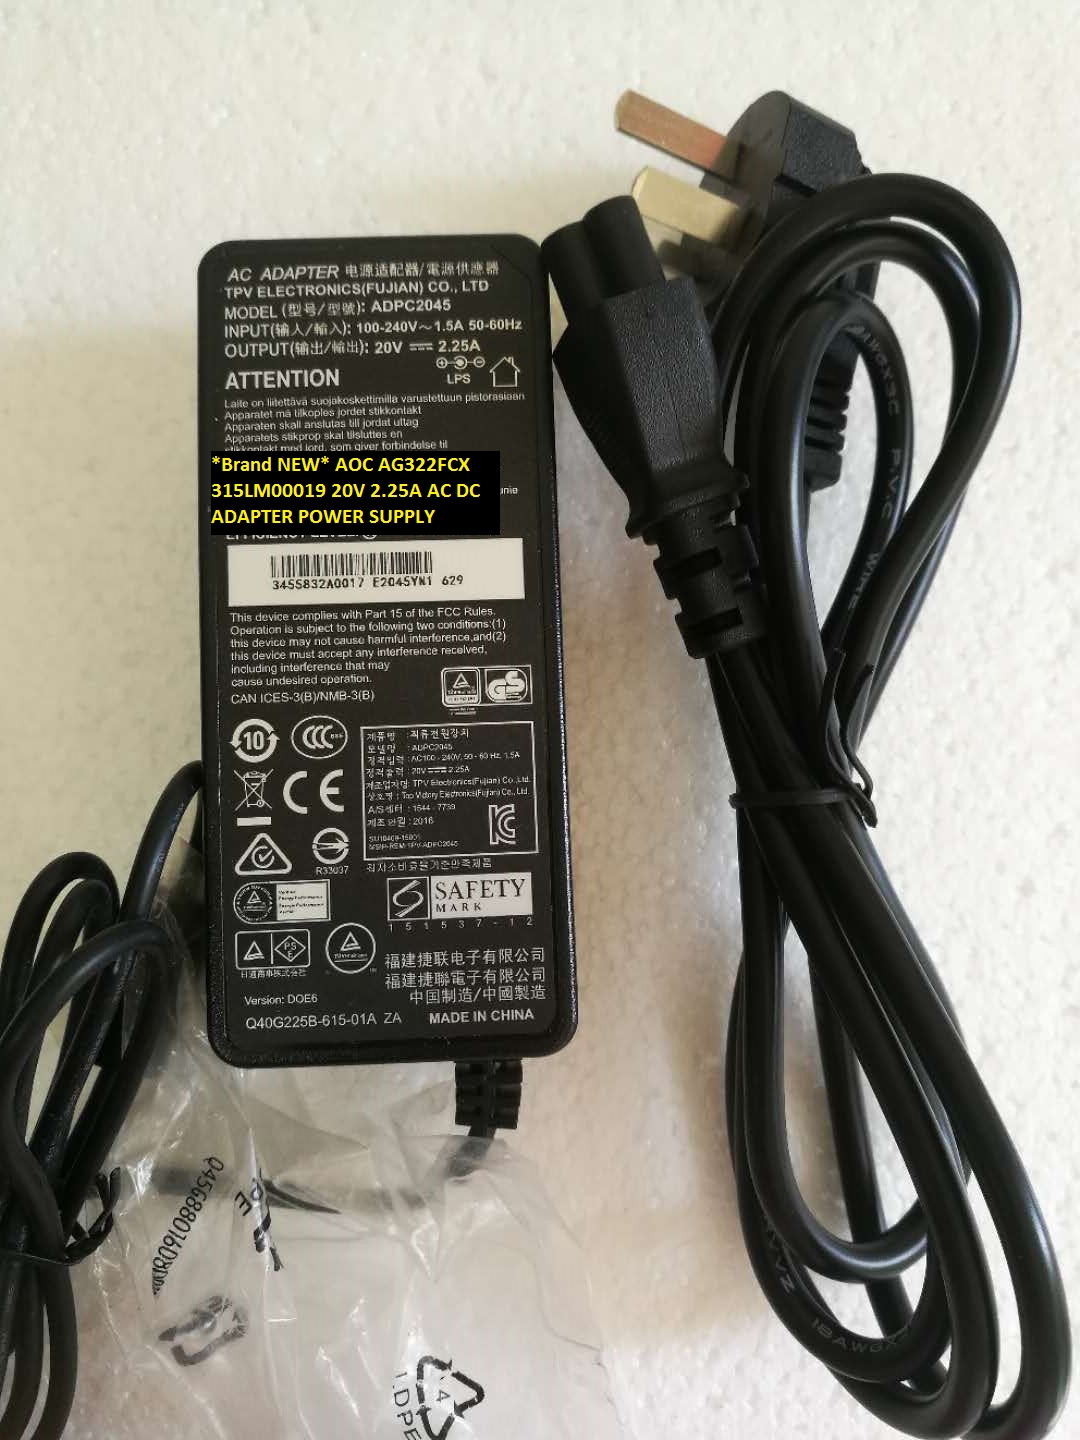 *Brand NEW* 20V 2.25A AC DC ADAPTER AOC 315LM00019 AG322FCX POWER SUPPLY